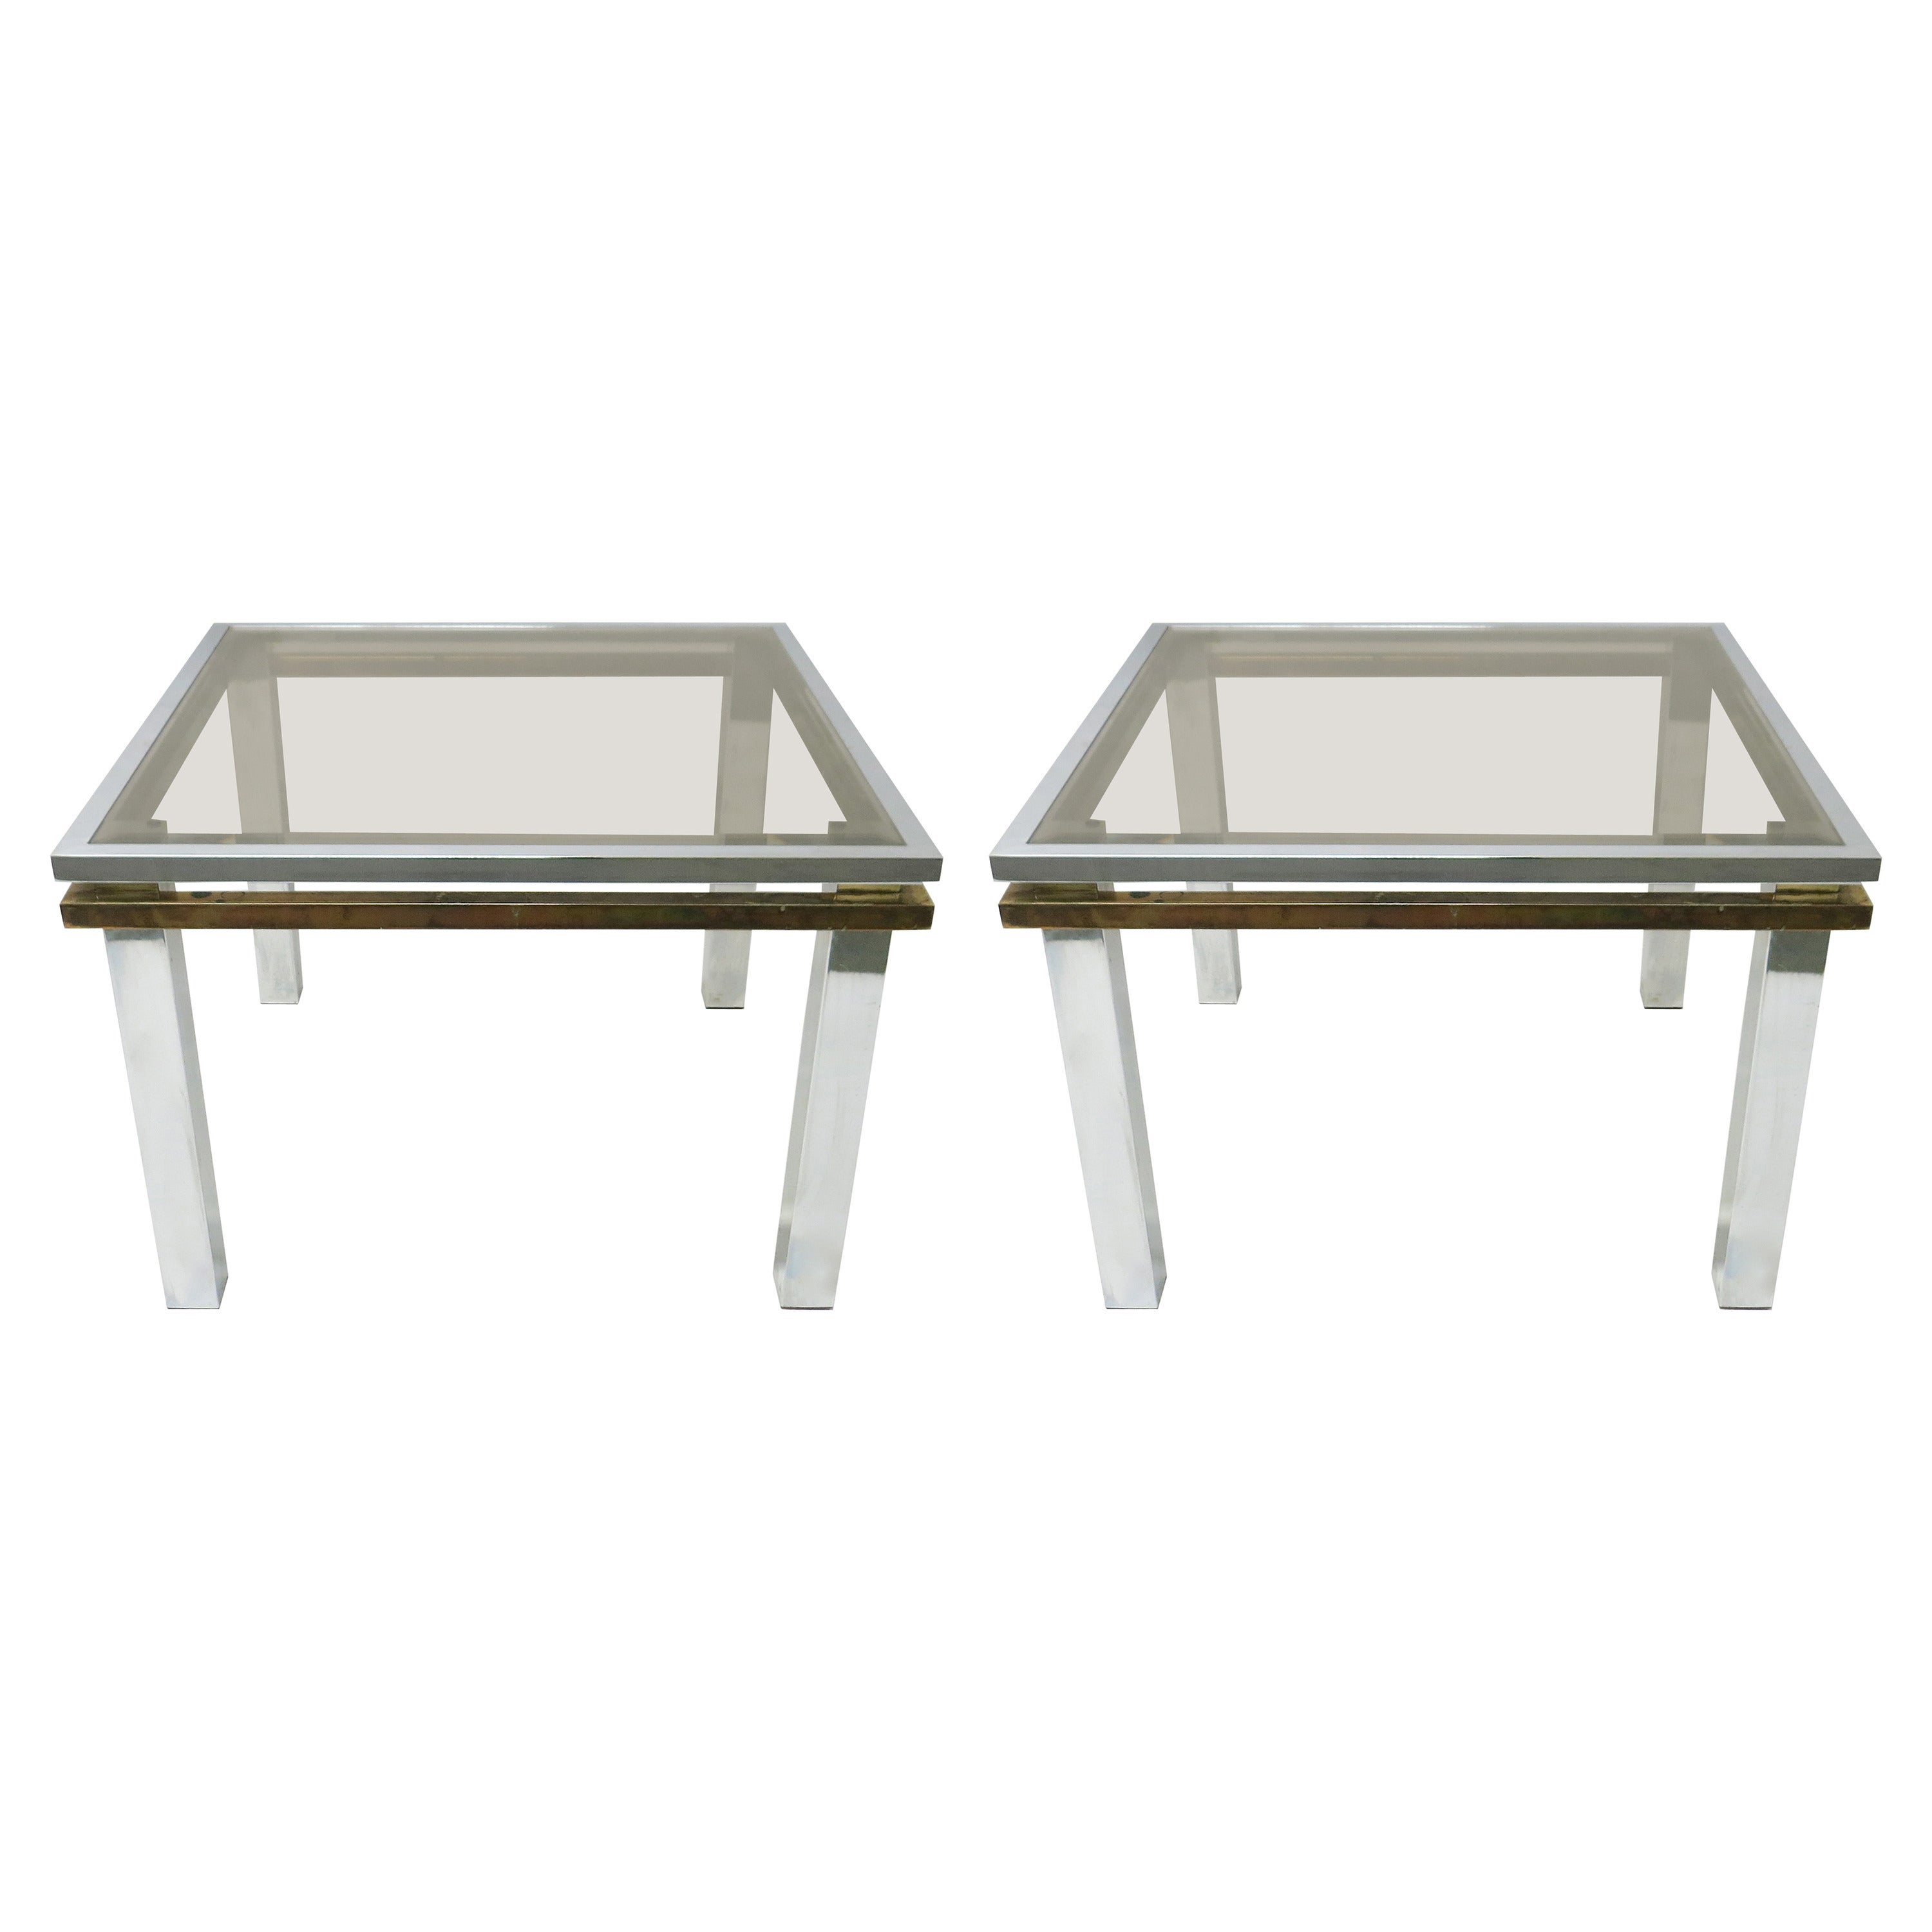 Pair of Square Side Tables in Chrome and Brass, USA C. 1970 For Sale